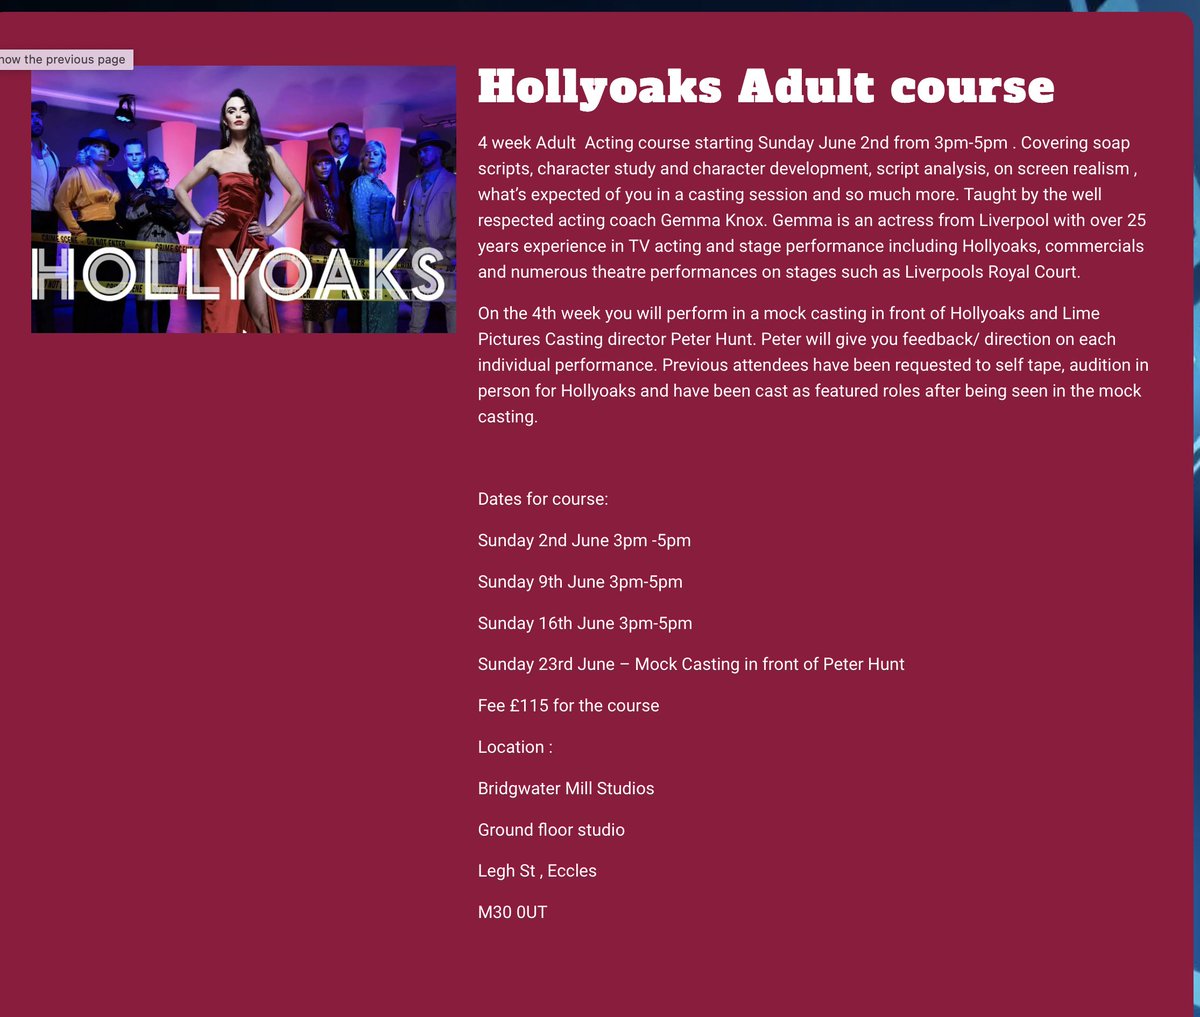 just 6 places available on our Hollyoaks adult course starting June 2nd. on the 4th week you will perform in a mock casting in front of Hollyoaks casting director from Lime pictures and C4 Peter Hunt. Click on the link below to book your place. screenplayacting.com/hollyoaks-adul…